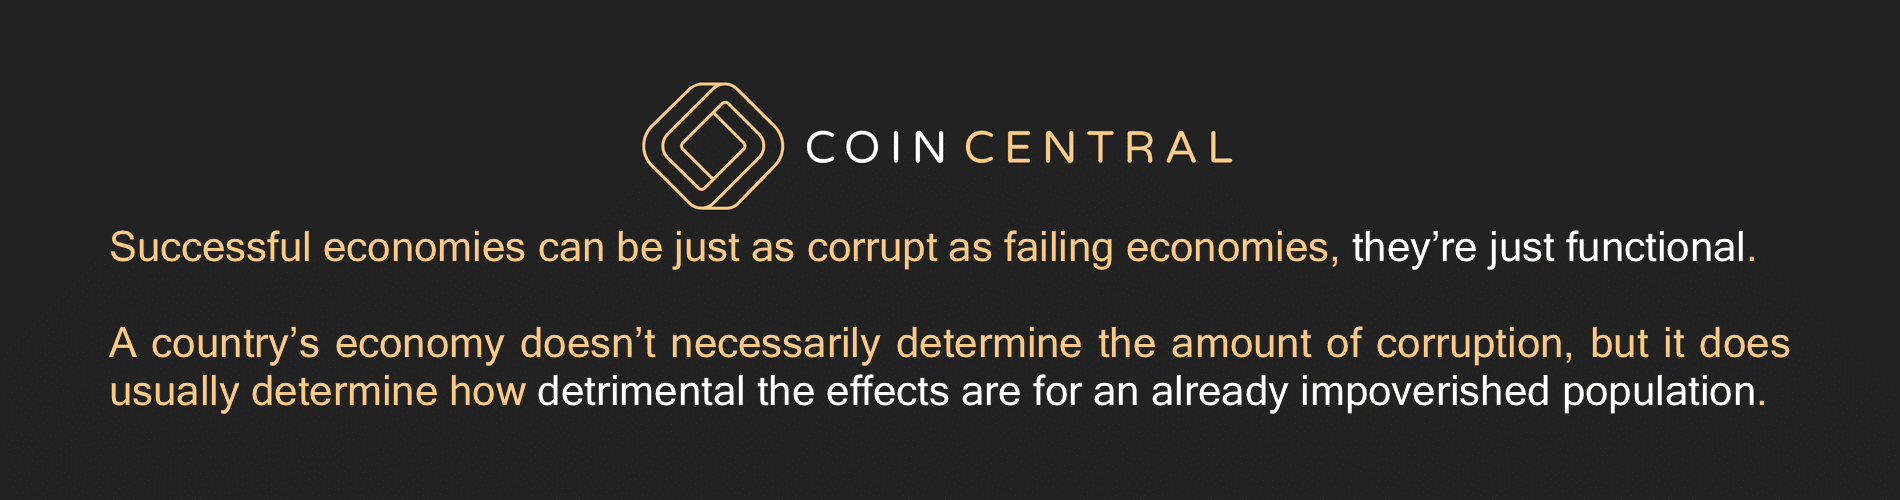 Successful economies can be just as corrupt as failing economies, they’re just functional.  A country’s economy doesn’t necessarily determine the amount of corruption, but it does usually determine how detrimental the effects are for an already impoverished population.